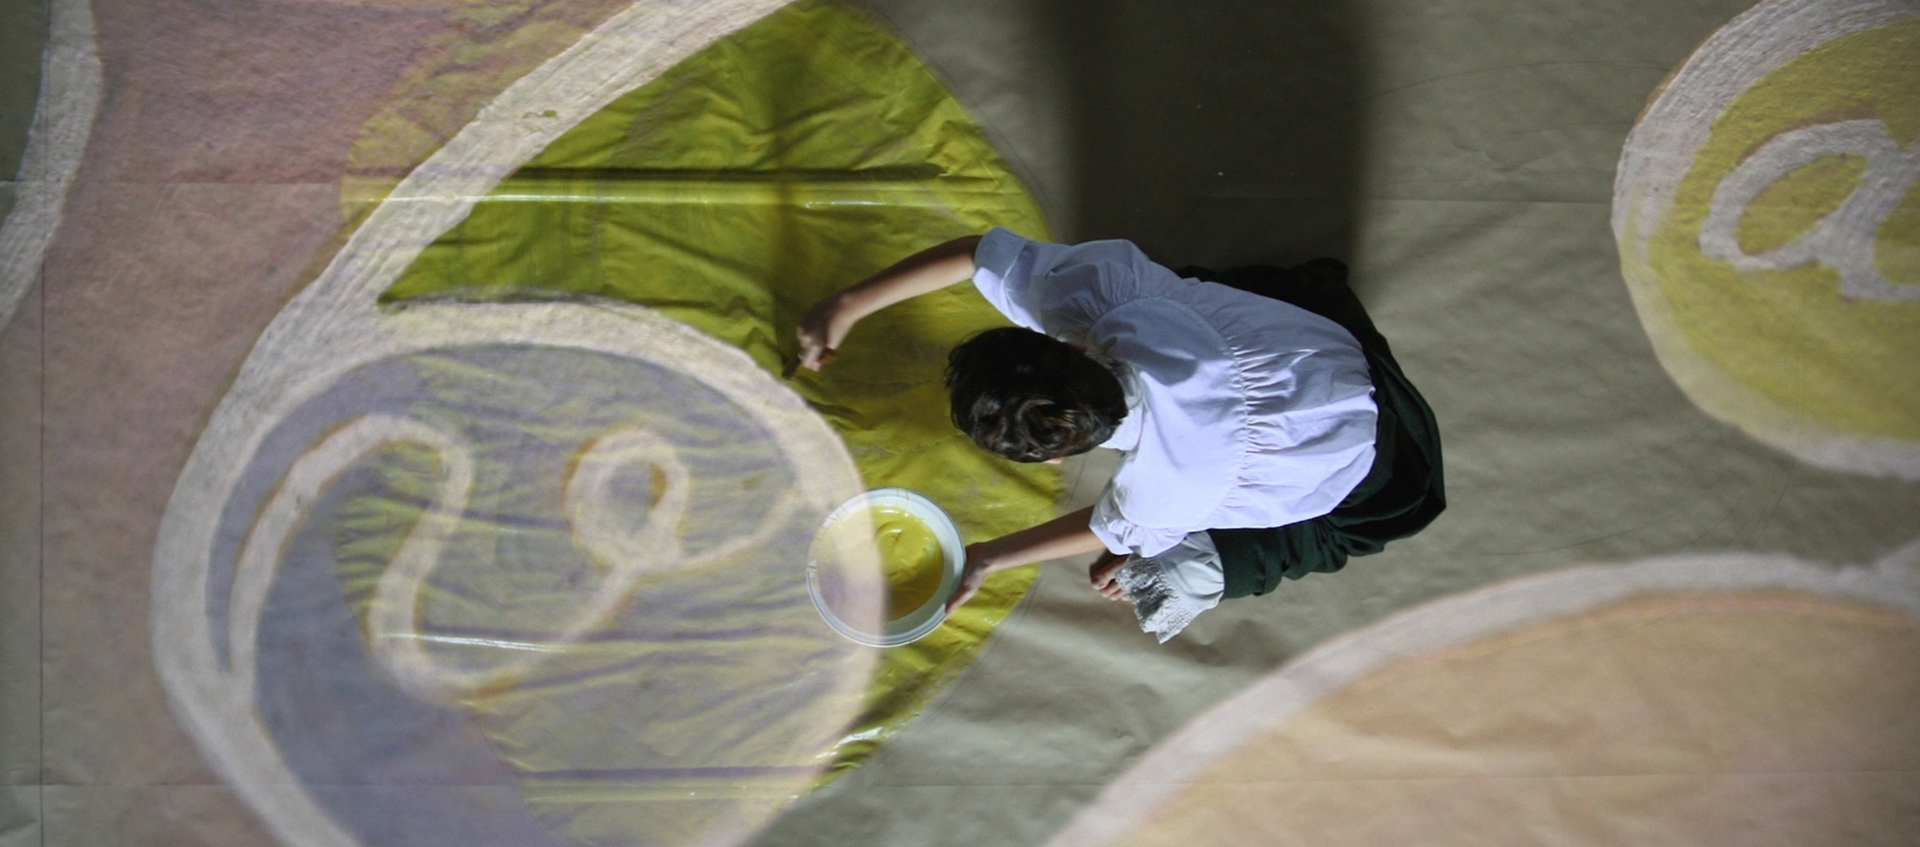 An actress reenacts artist Hilma af Klint painting a large canvas that is laid on the floor